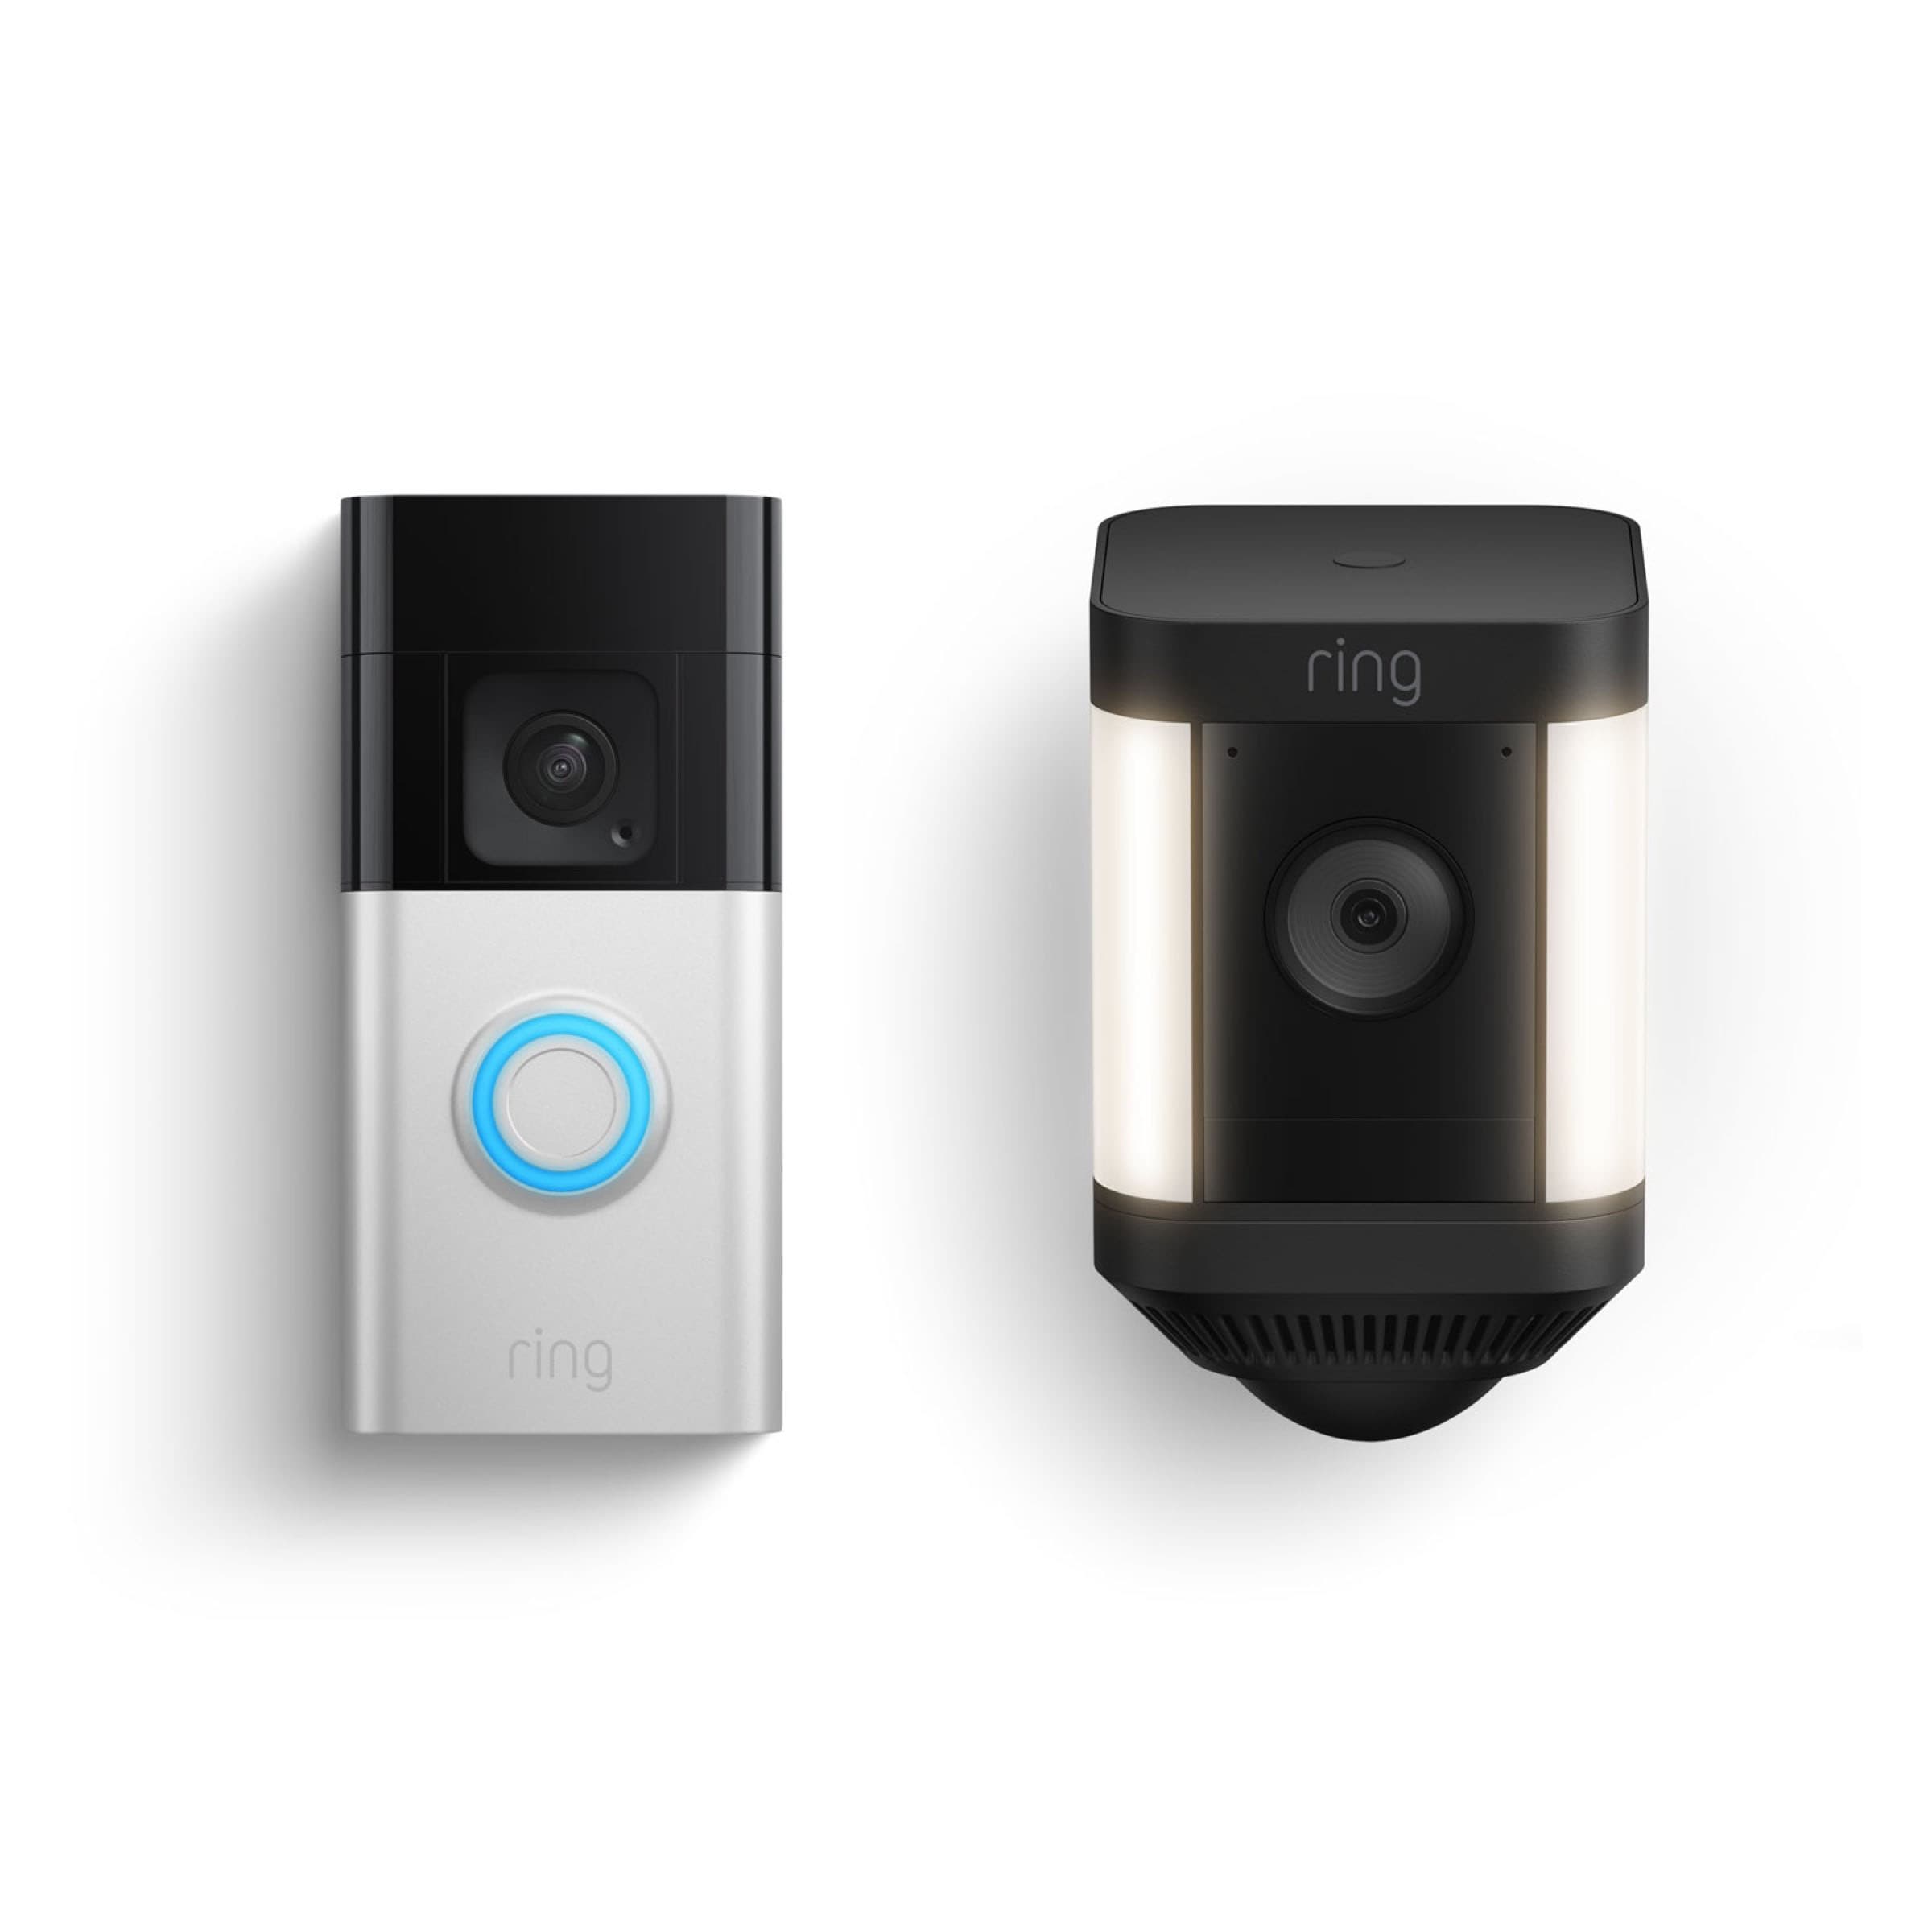 Ring Video Doorbell 2 review: A fun IoT device to boost your